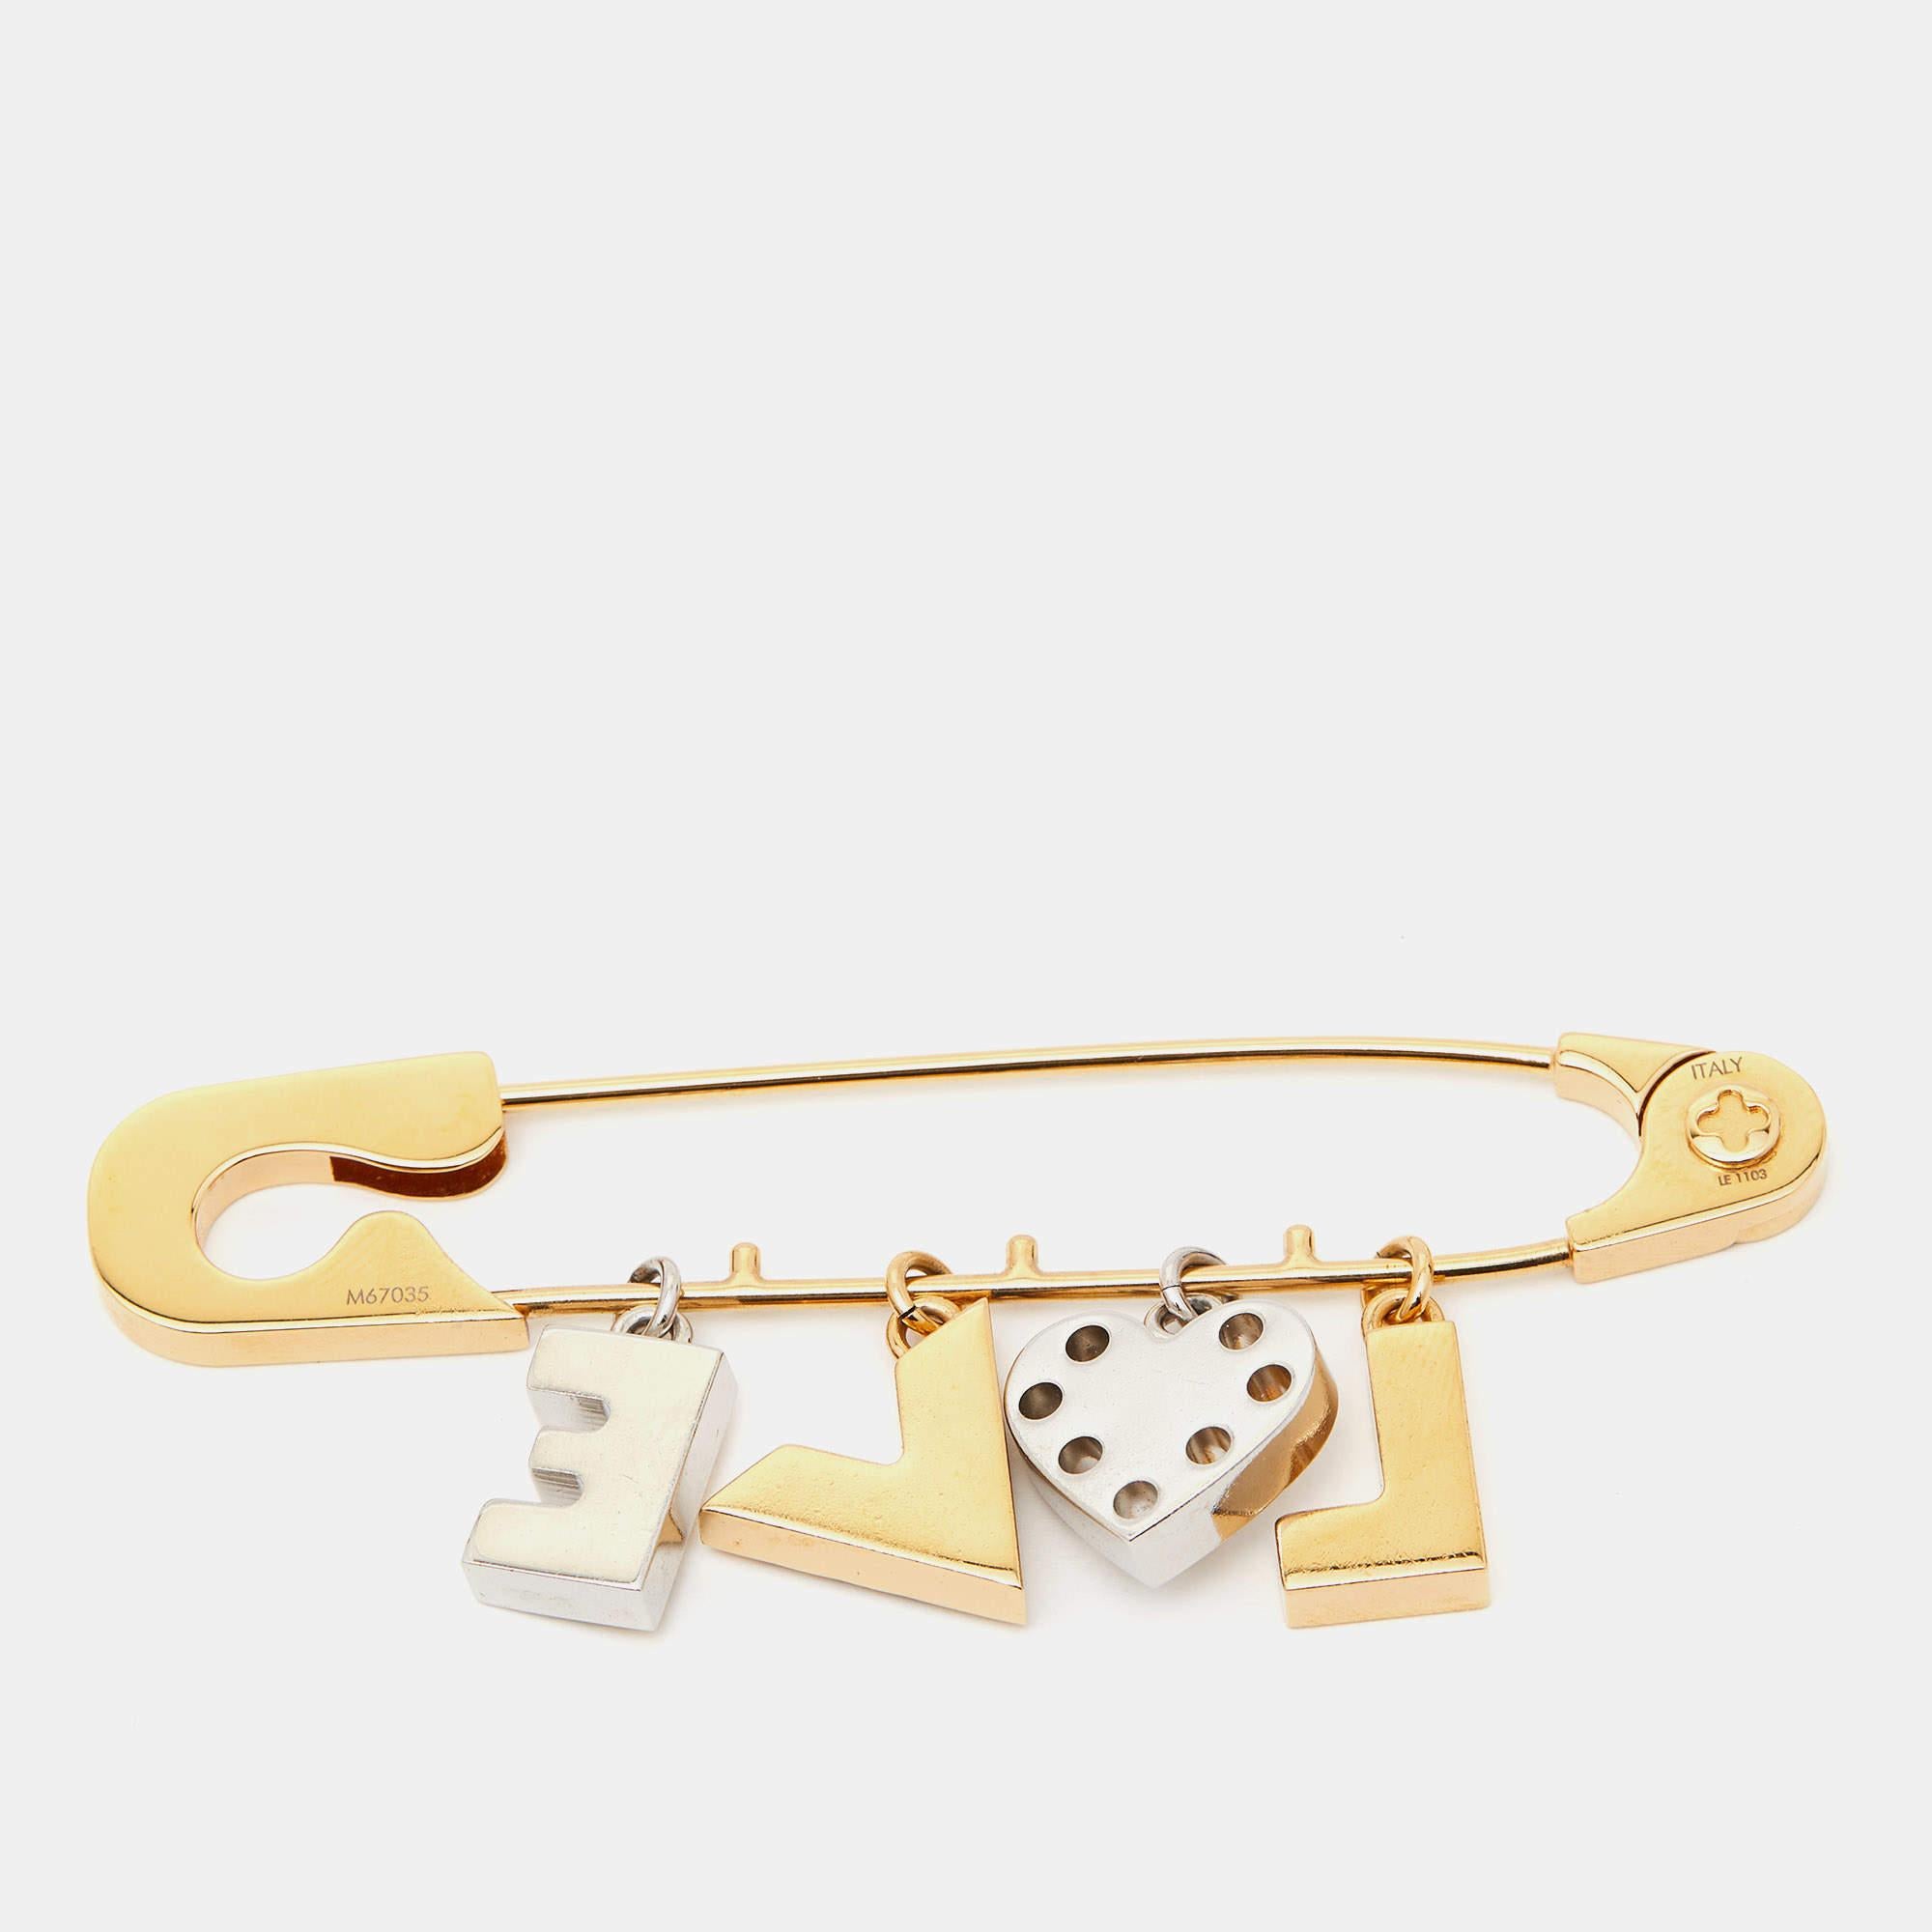 Add a statement of love to your OOTD with this Louis Vuitton brooch. It is made of gold-tone metal and detailed with LOVE letters and signature accents.

Includes: Original Dustbag, Original Box

